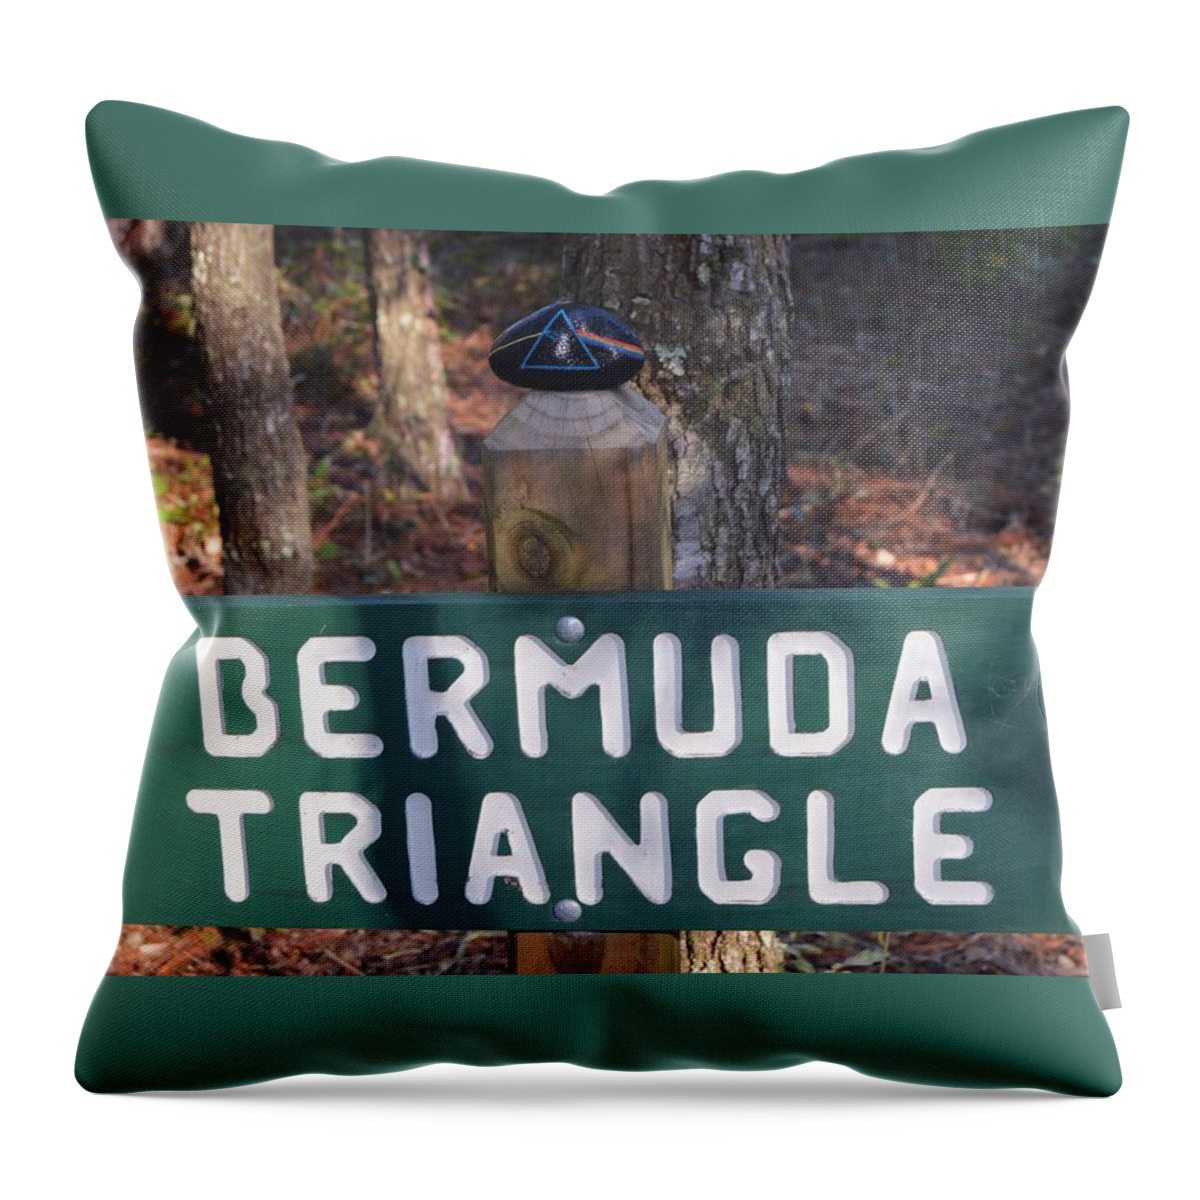 Bermuda Triangle Throw Pillow featuring the photograph Bermuda Triangle by Warren Thompson